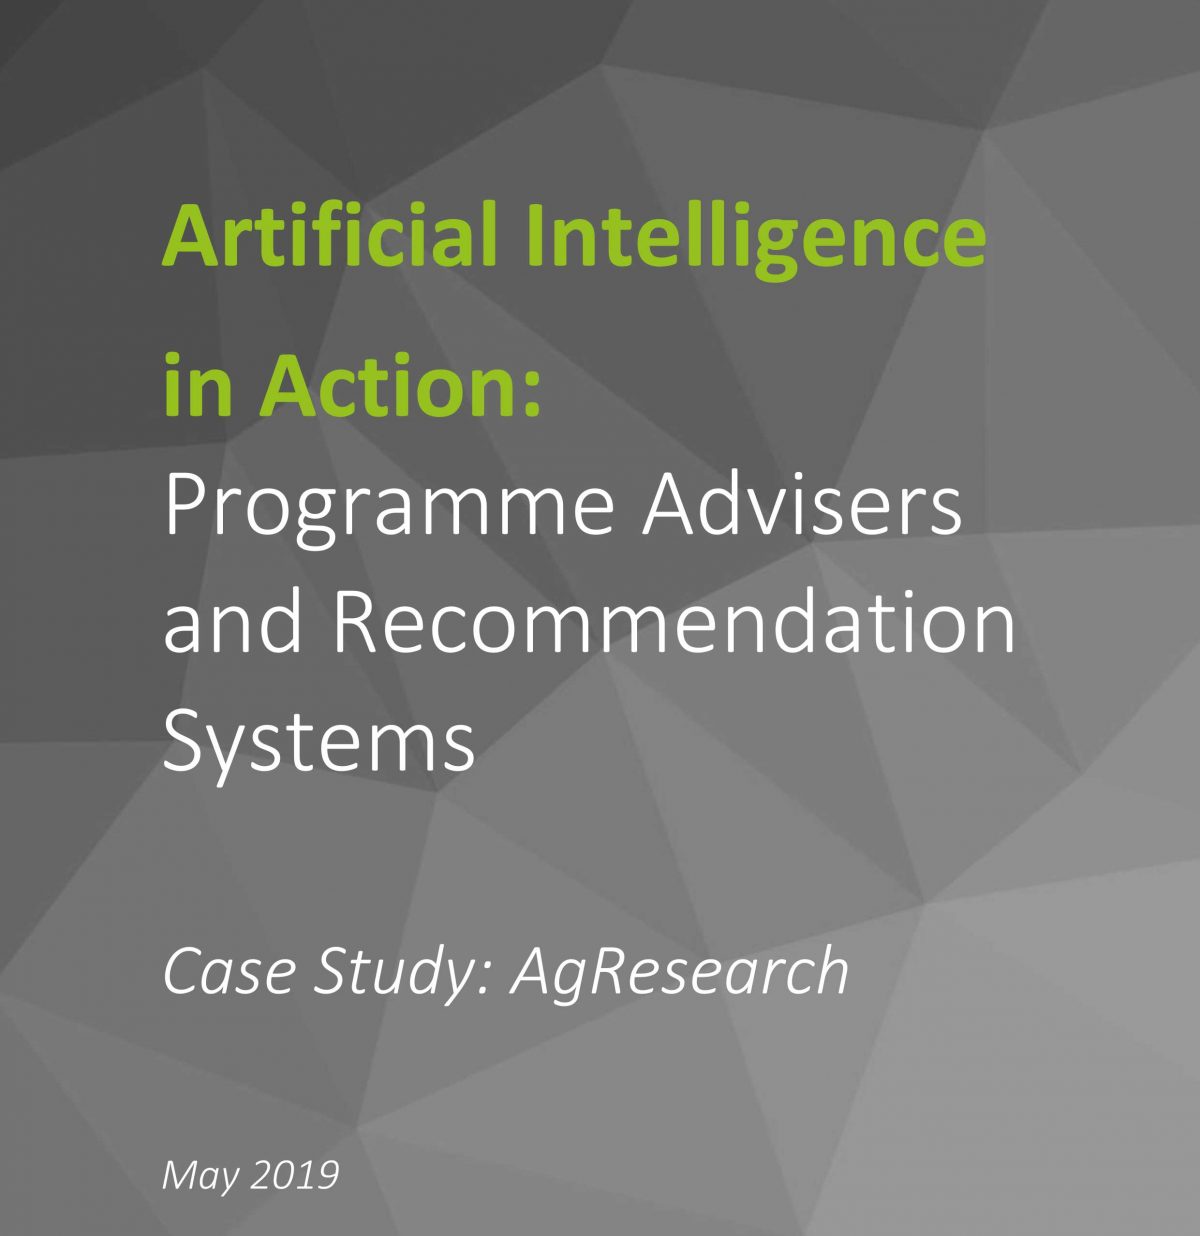 Artificial Intelligence in Action: Programme Advisers and Recommendation Systems